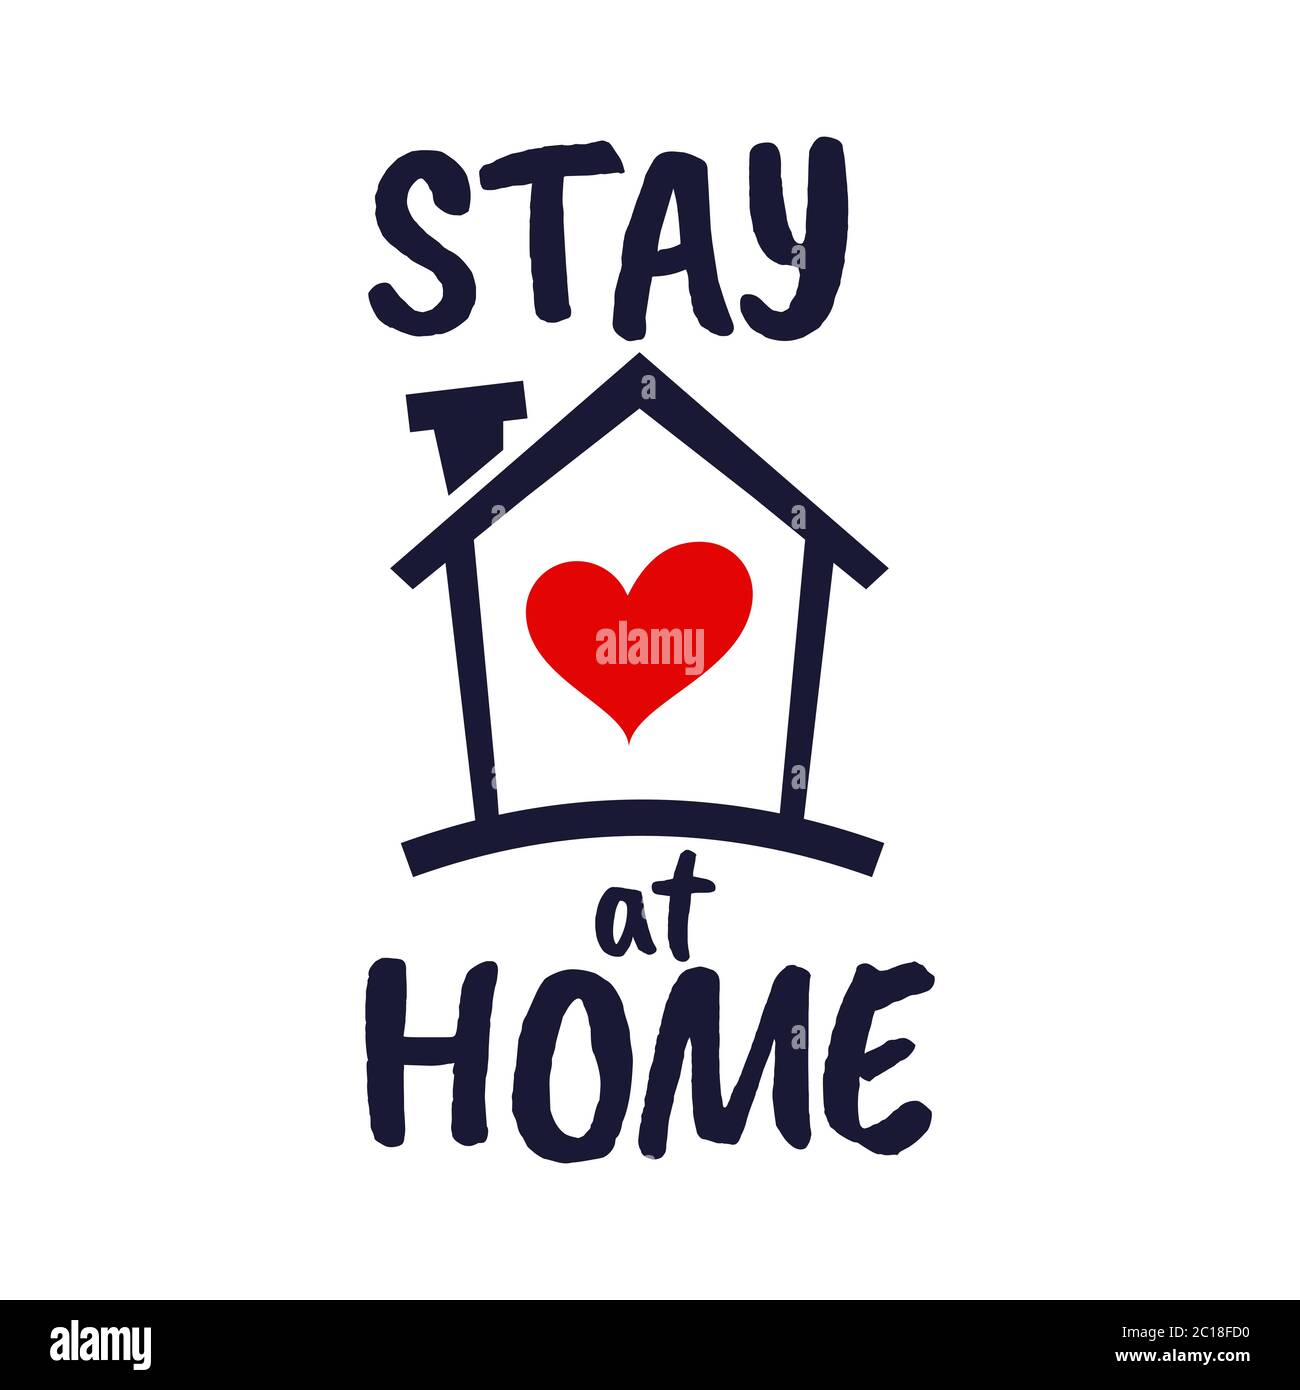 vector illustration of typography of 'Stay at Home' with a house and heart icon. Suitable for self-quarantine campaign and prevention of COVID-19. Stock Vector